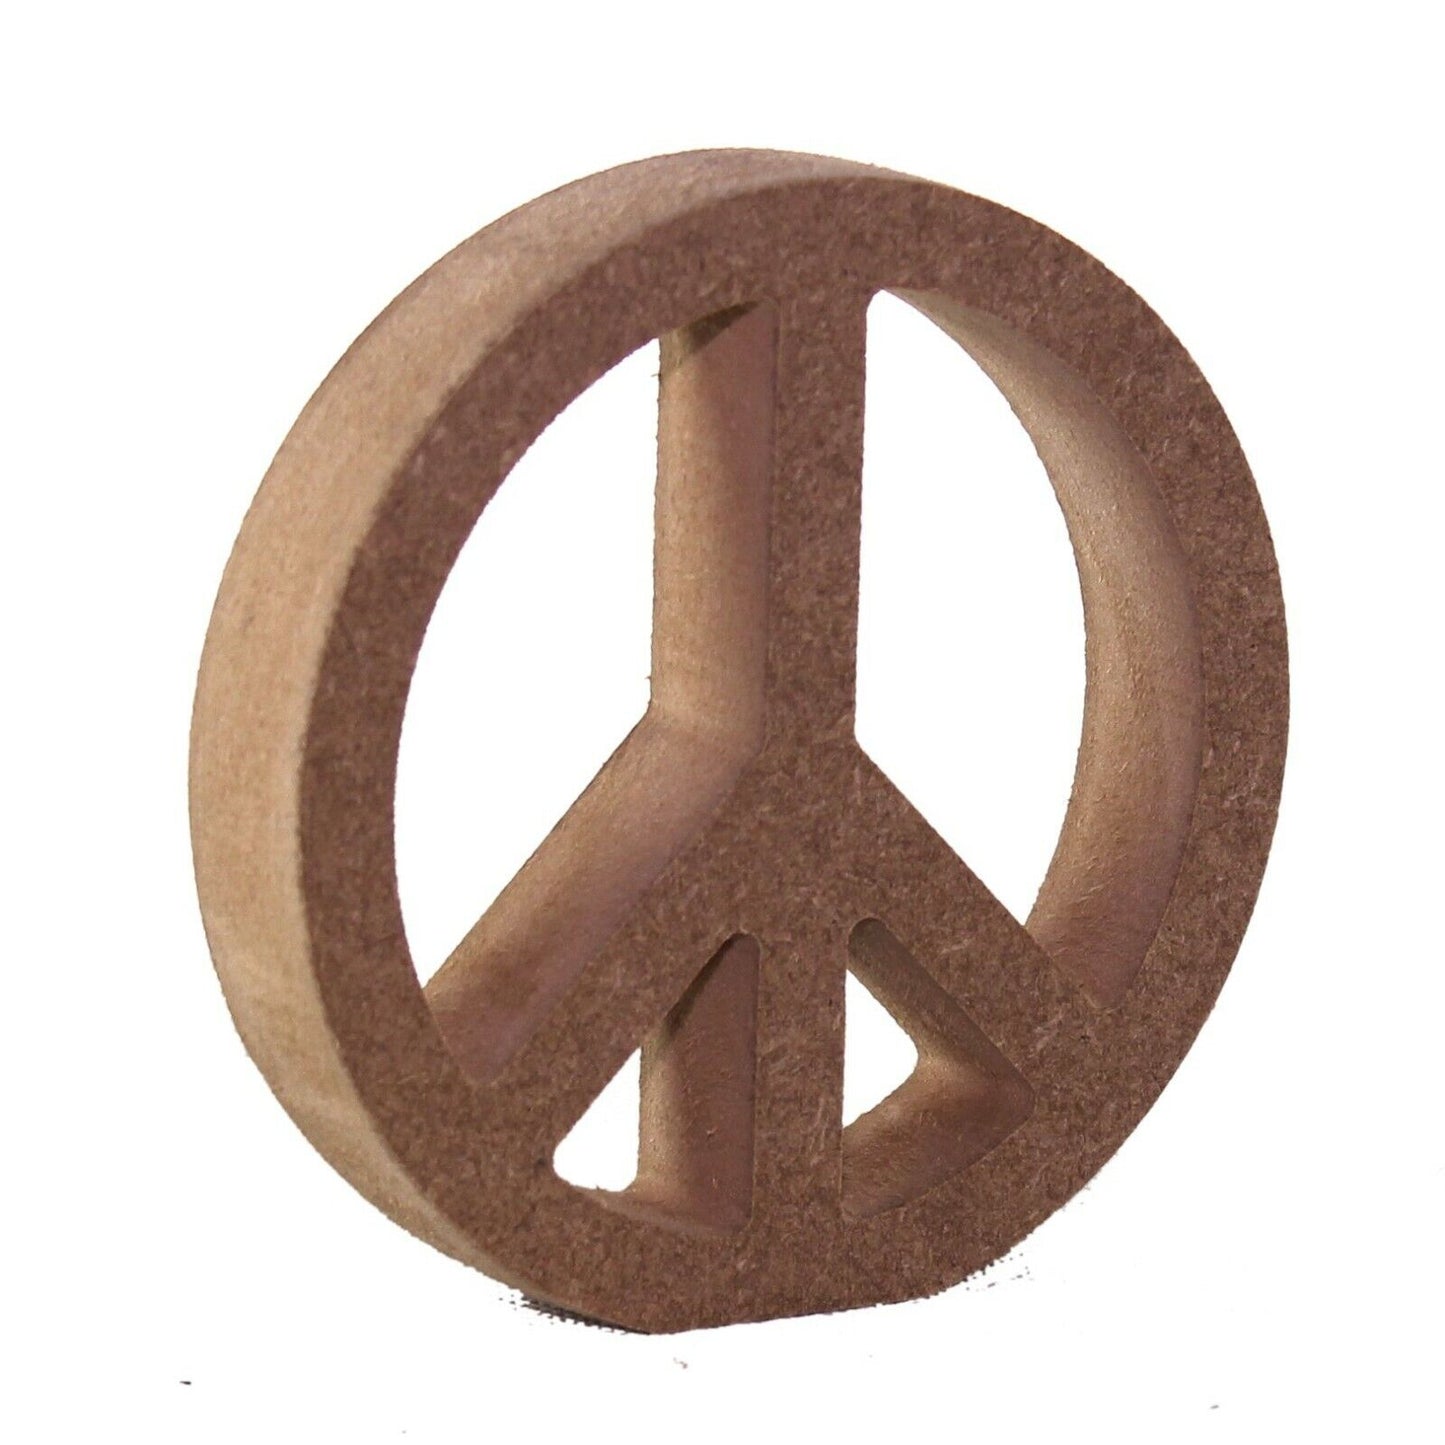 Free Standing 18mm MDF Peace Symbol Craft Shape Various Sizes. CND, 60s, Hippy